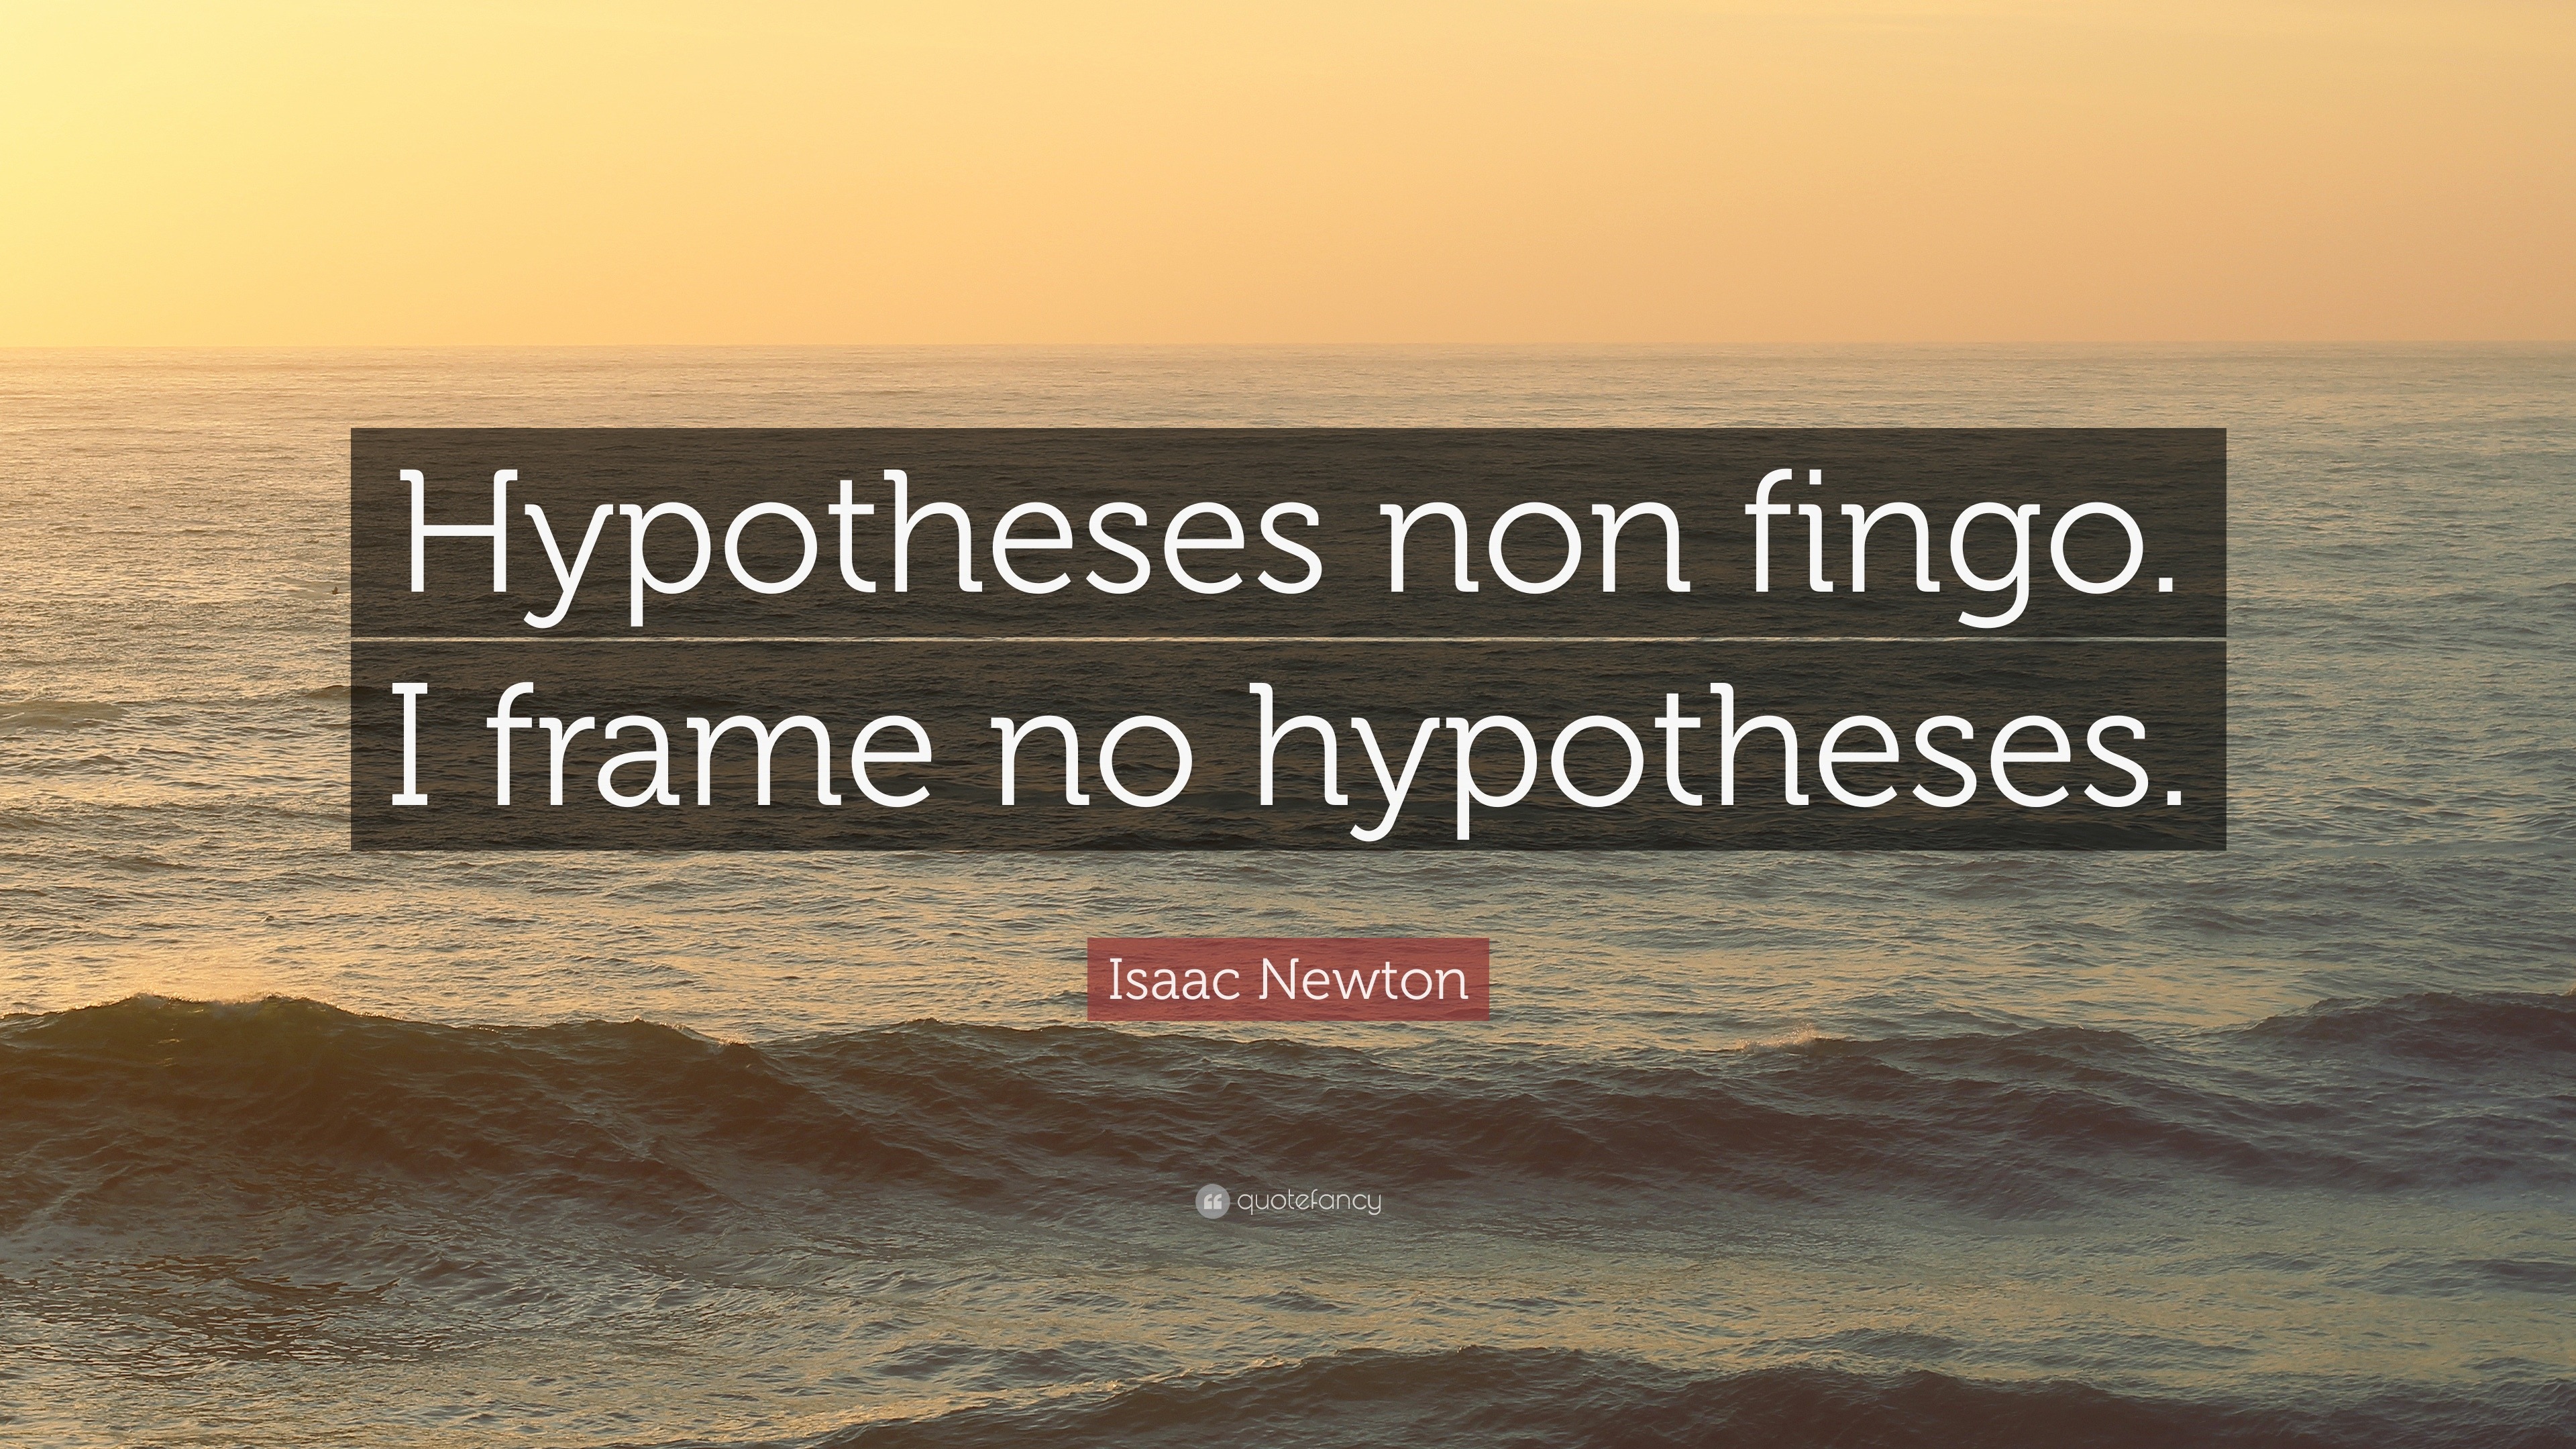 meaning of hypothesis non fingo